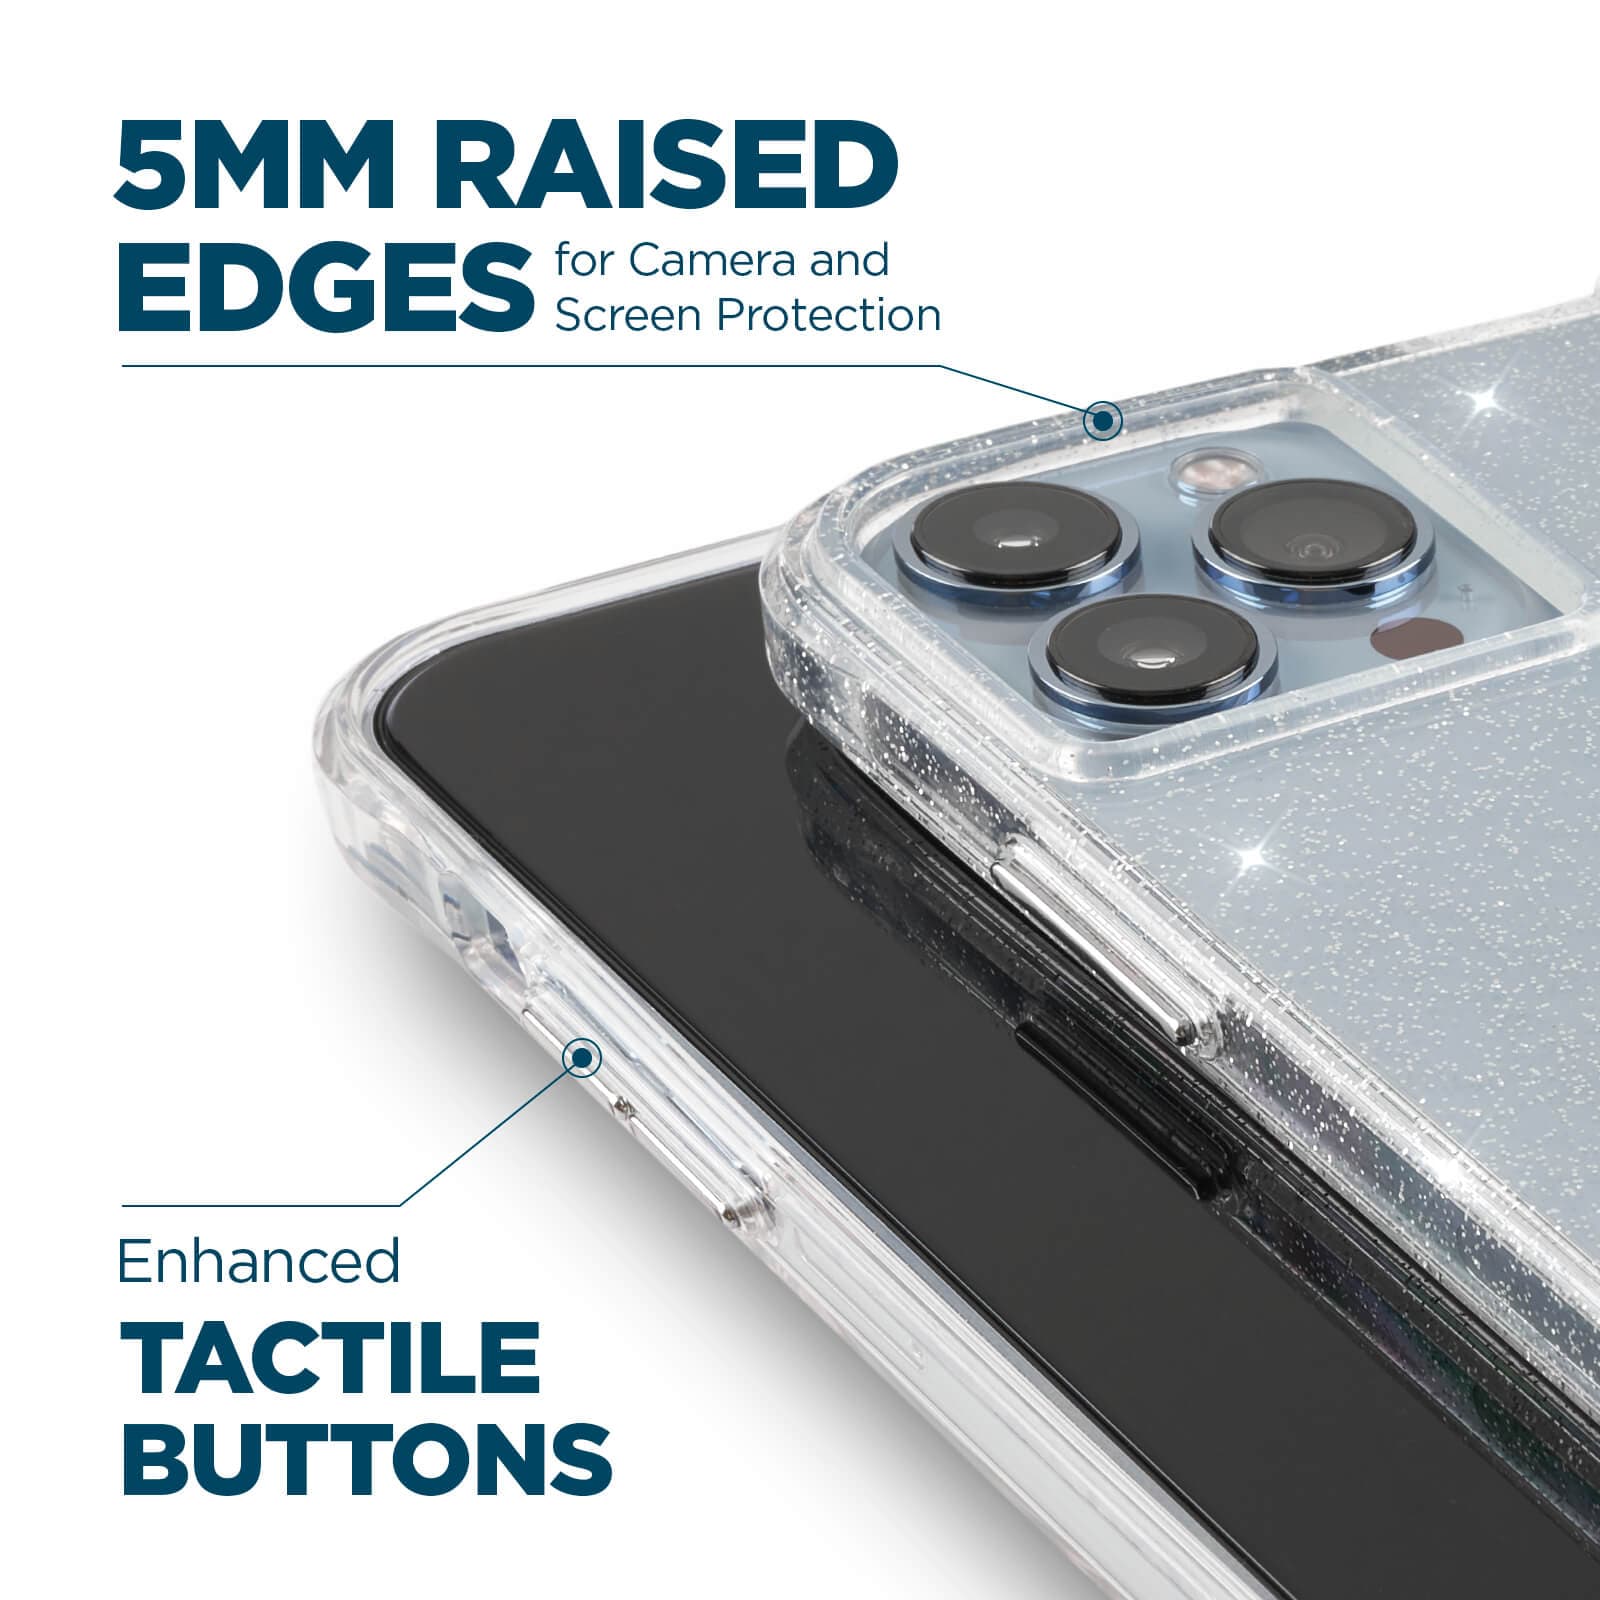 5mm raised edges for camera and screen protection. enhanced tactile buttons. color::Clear